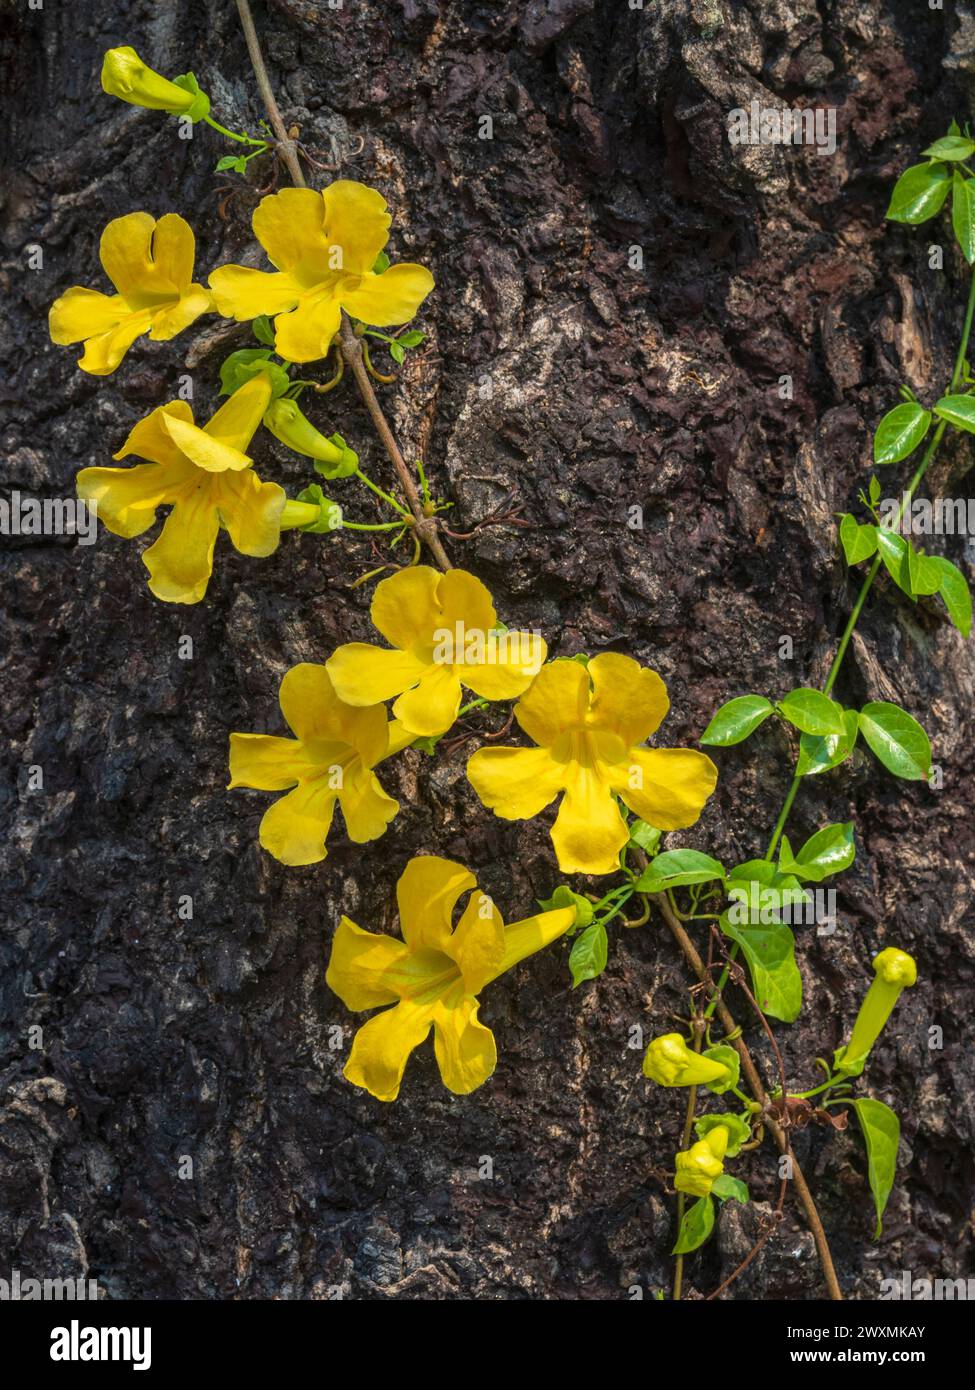 Closeup view of fresh yellow flowers of dolichandra unguis-cati aka cat's claw creeper, funnel creeper or cat's claw trumpet growing on tree trunk Stock Photo